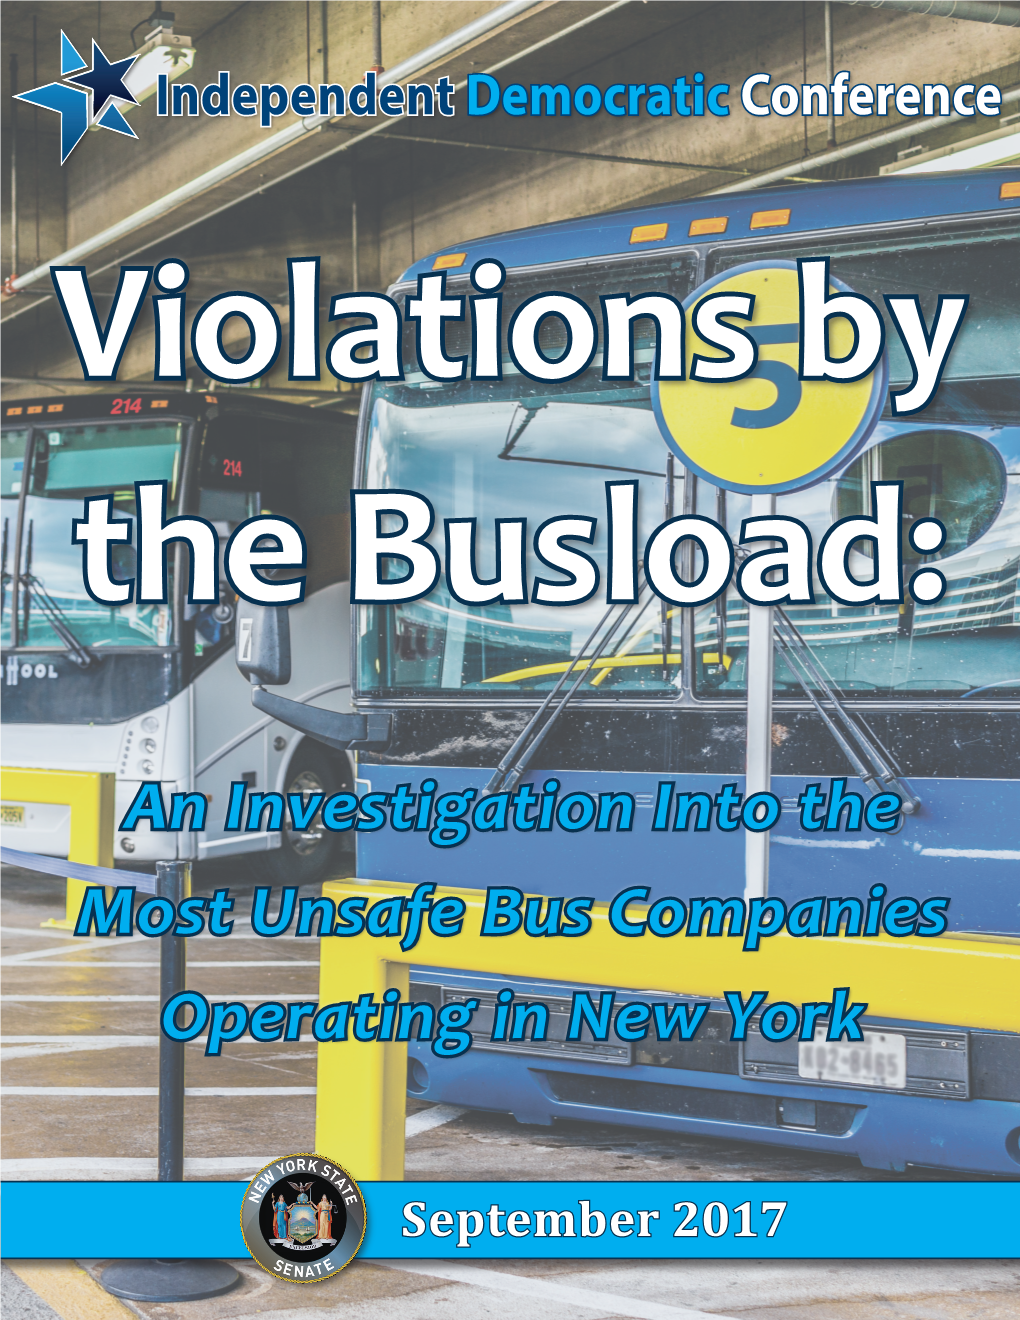 An Investigation Into the Most Unsafe Bus Companies Operating in New York